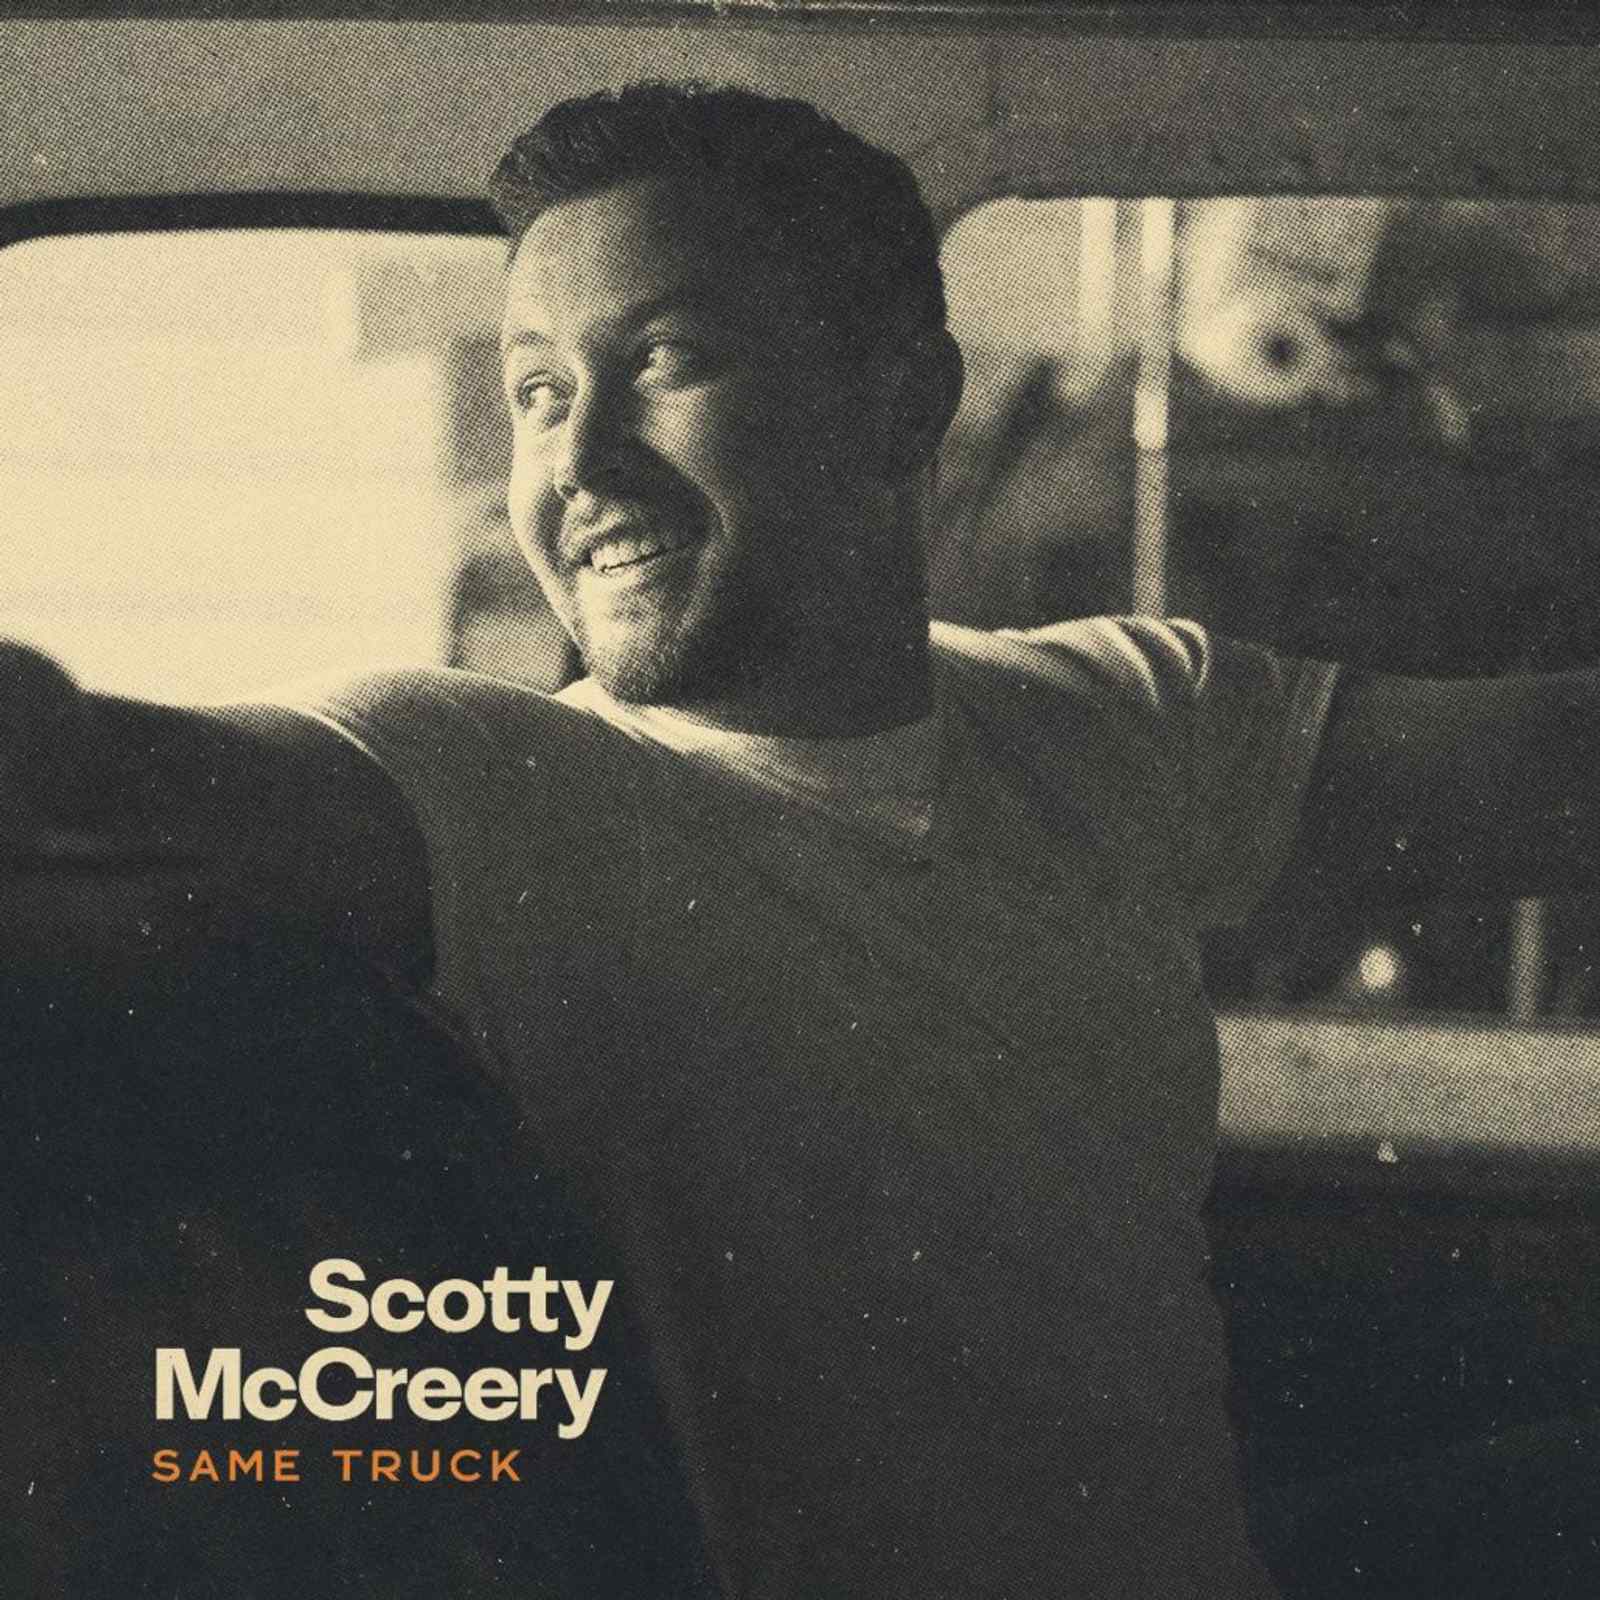 Same Truck by Scotty McCreery